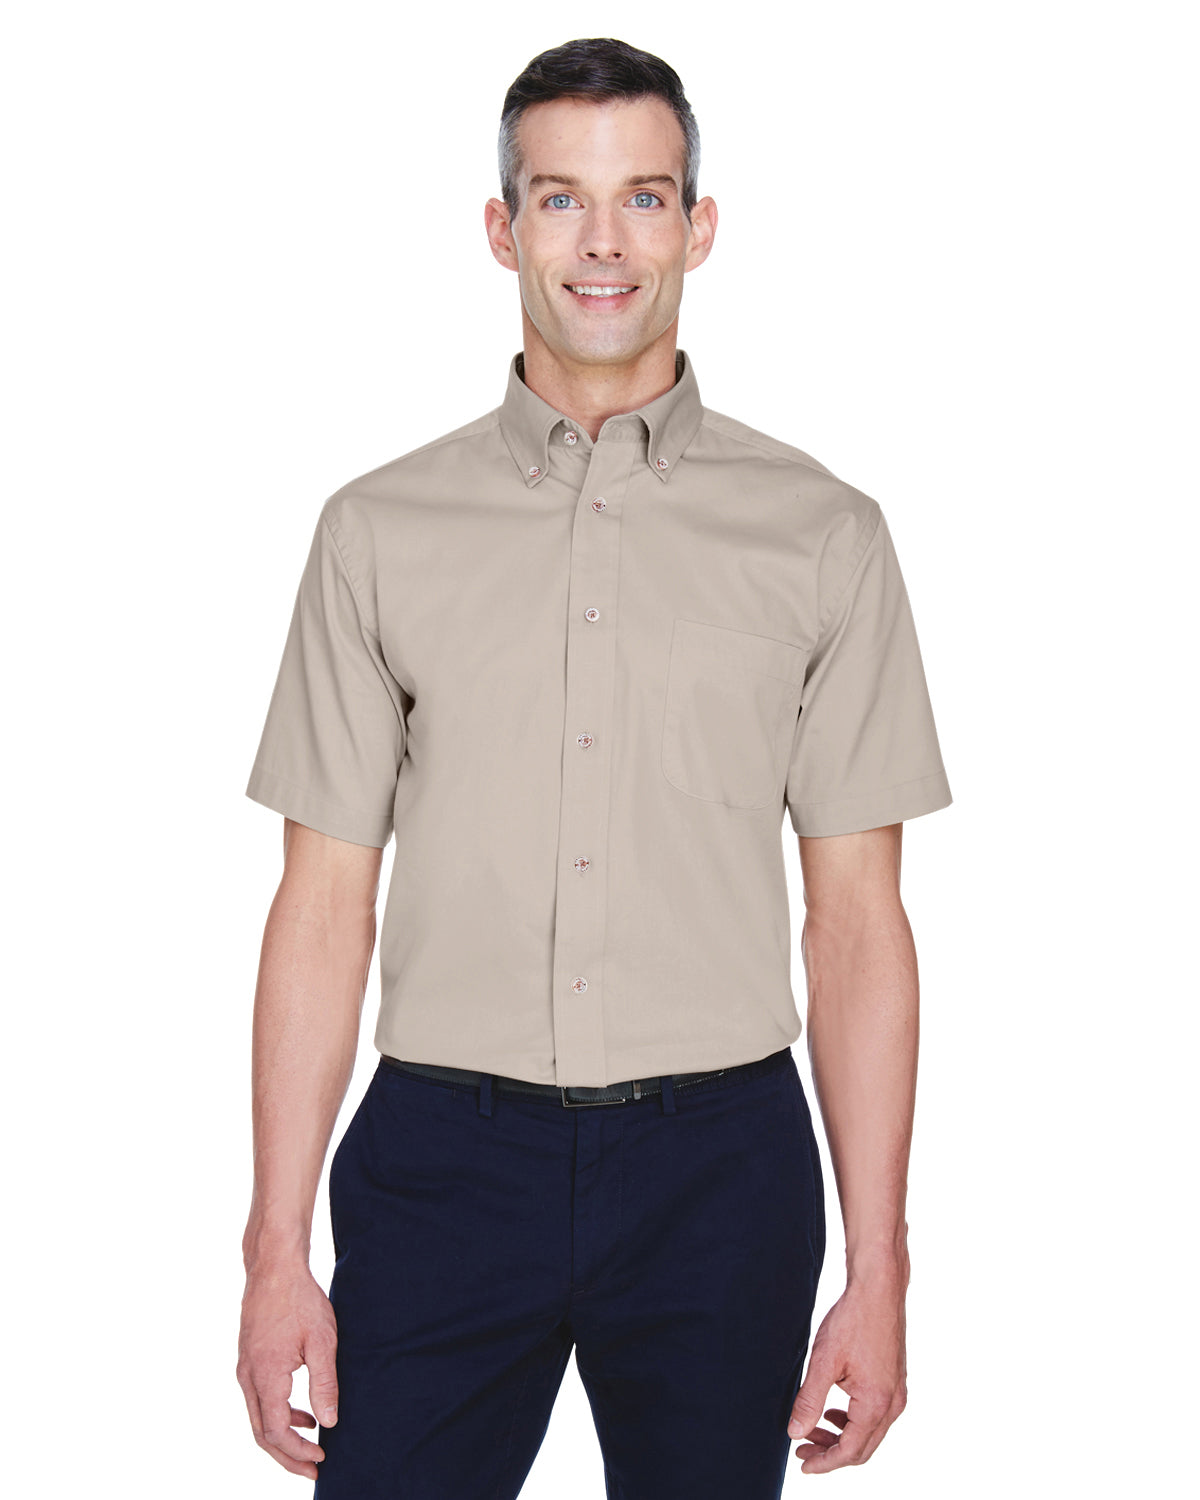 Men's Easy Blend Short Sleeve Twill Shirt with Stain Release